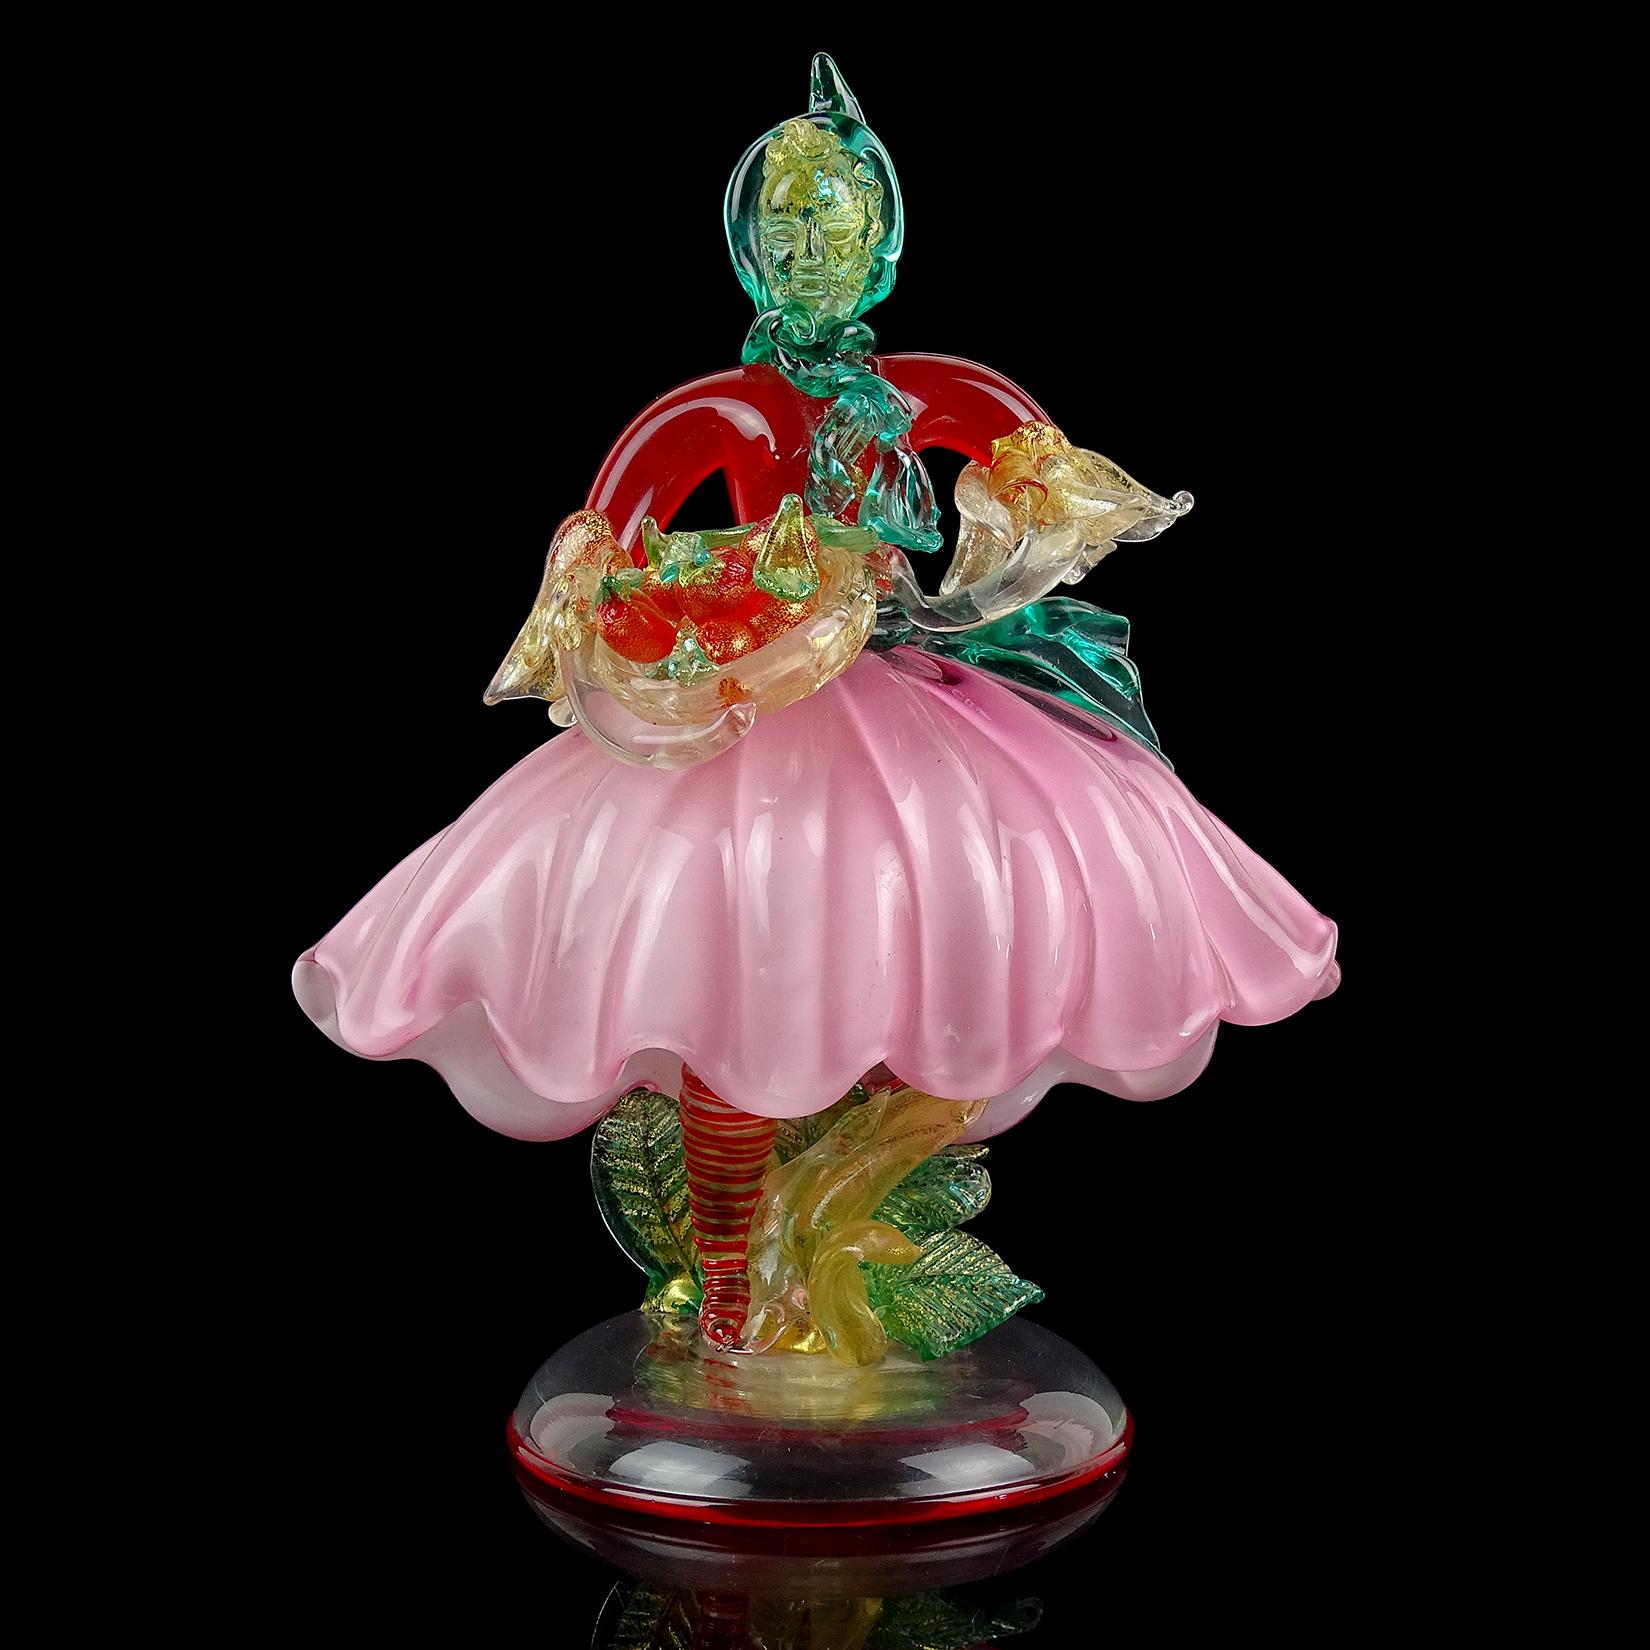 Beautiful and rare, vintage Murano hand blown red, pink, green and gold flecks Italian art glass woman figurine / sculpture. Documented to designer Flavio Poli for Seguso Vetri d'Arte, circa 1954. Model number 6938, and published. The figure is on